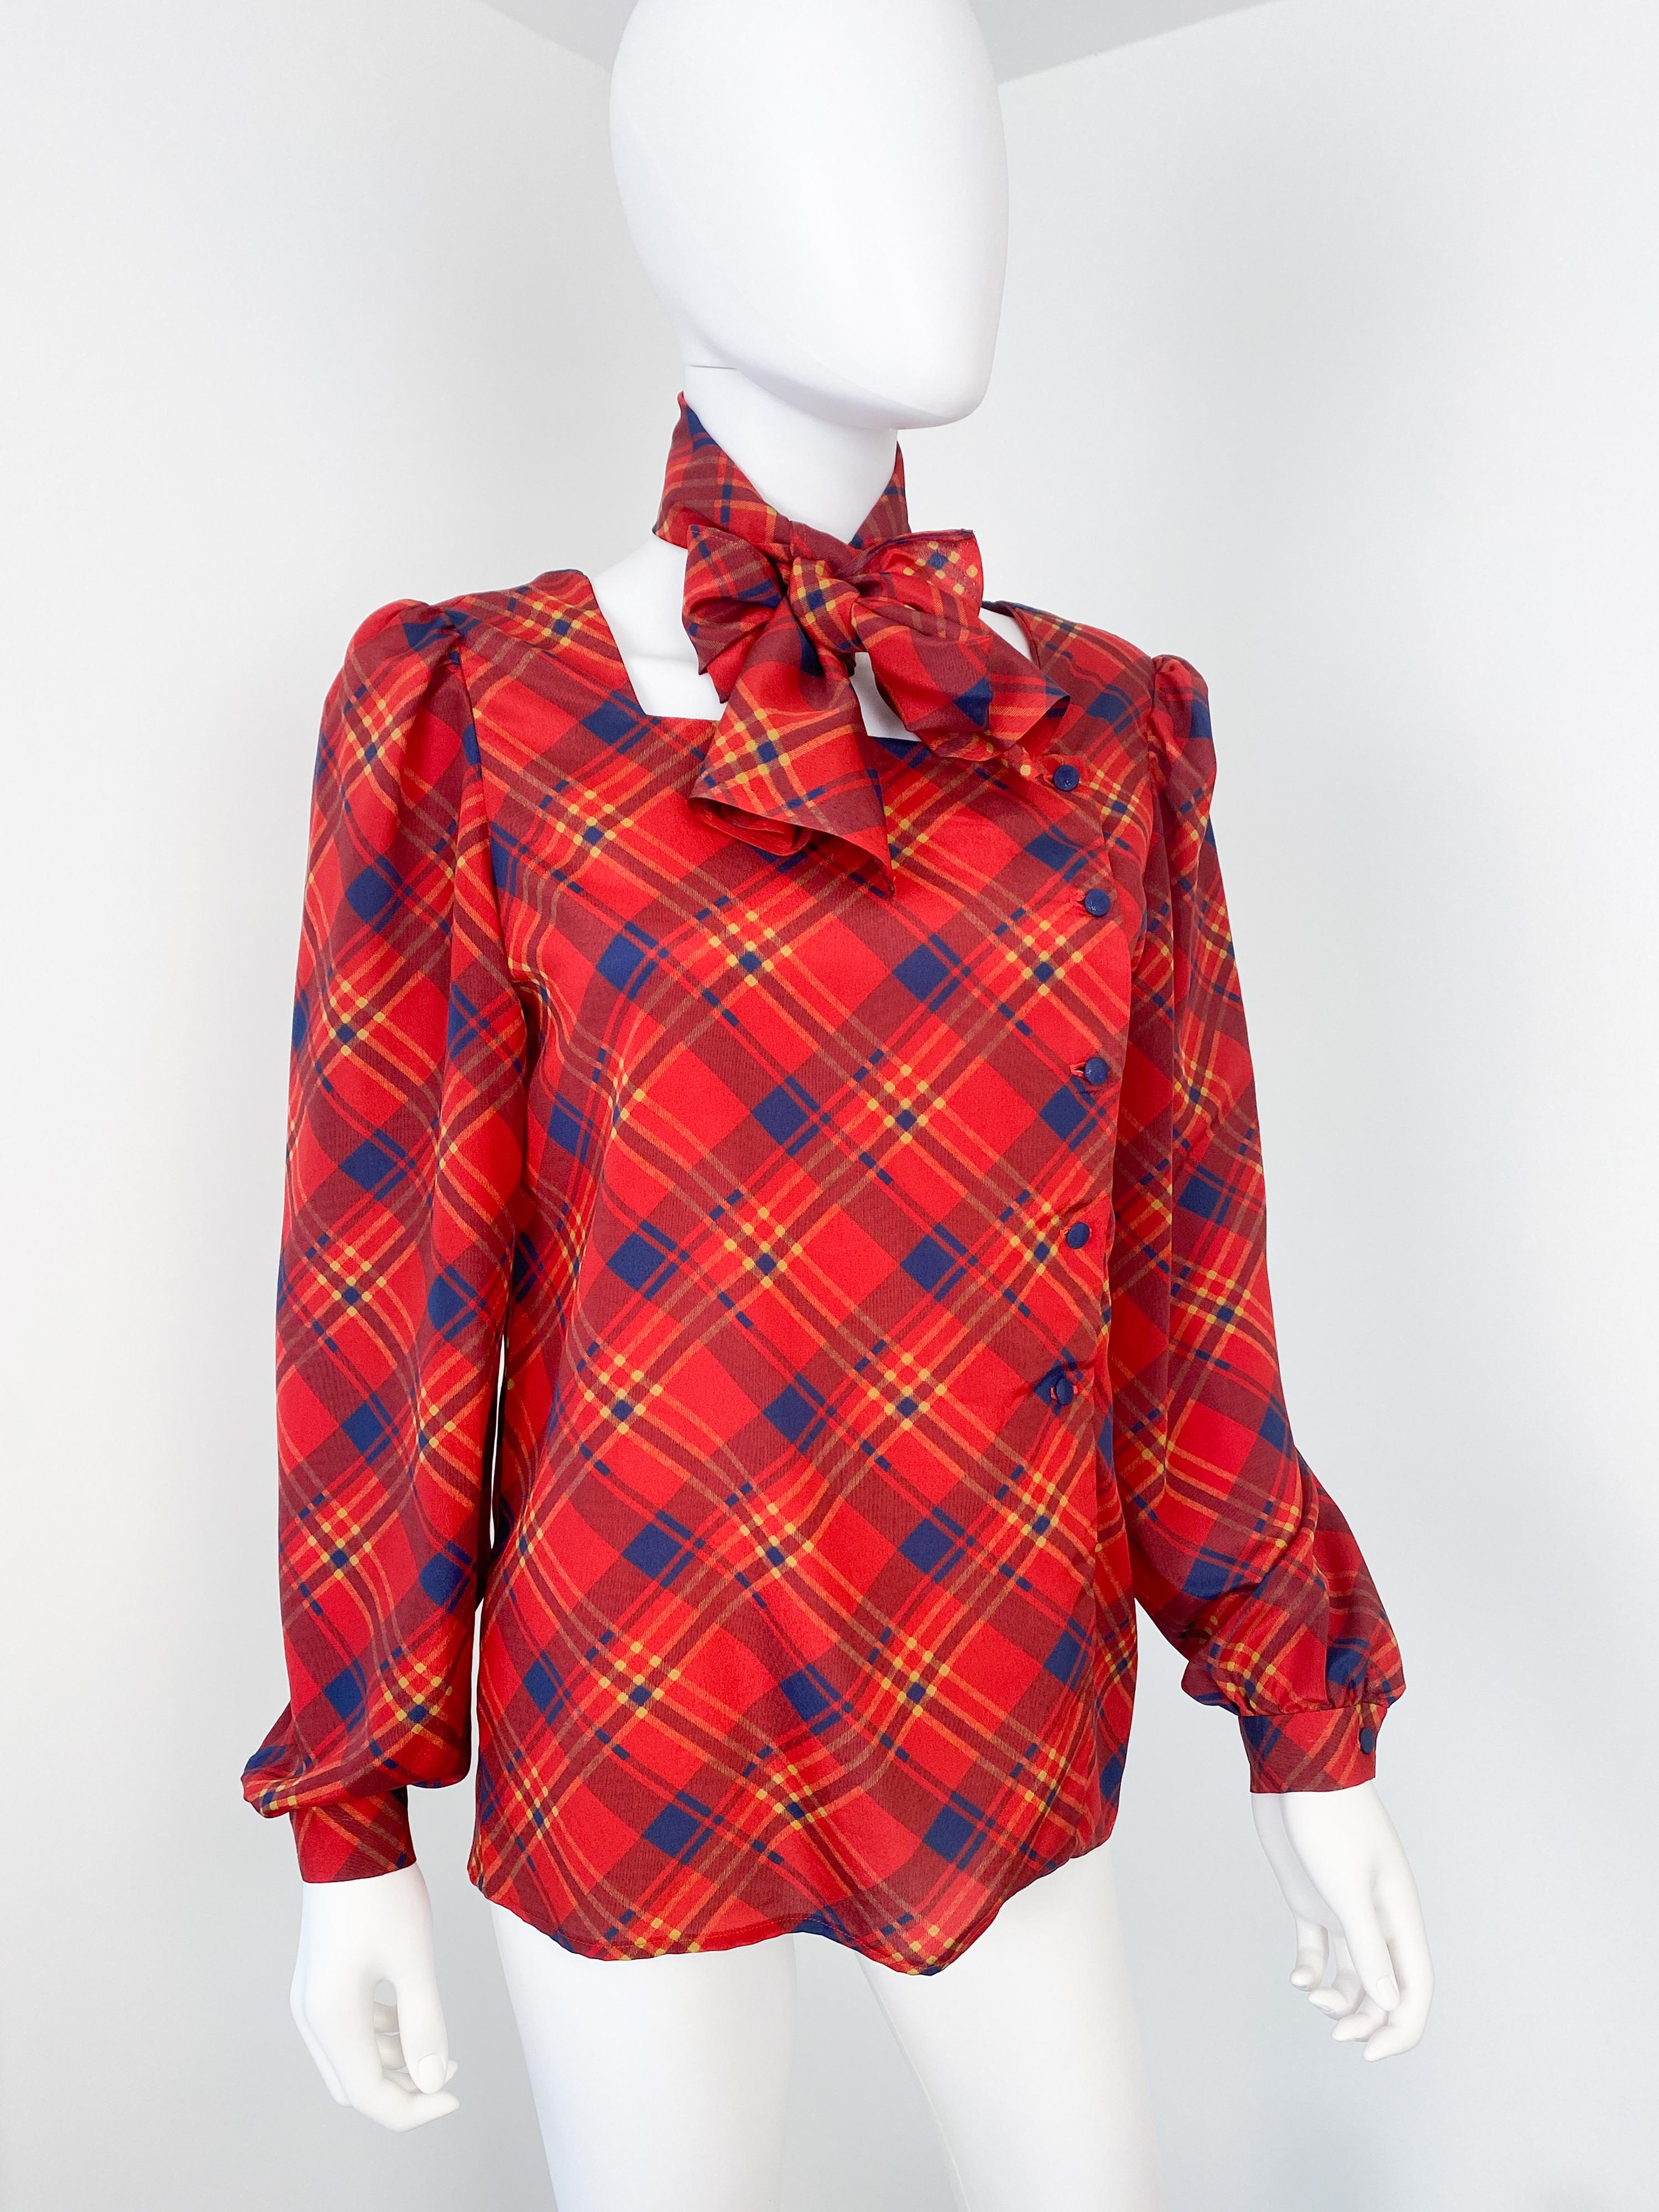 Wonderful vintage 1980s silky polyester blouse with additional bow scarf to create versatile looks. Red color fabric with tartan pattern and blue and yellow contrast. The unusual square collar shape has the buttons closing asymmetric and located on